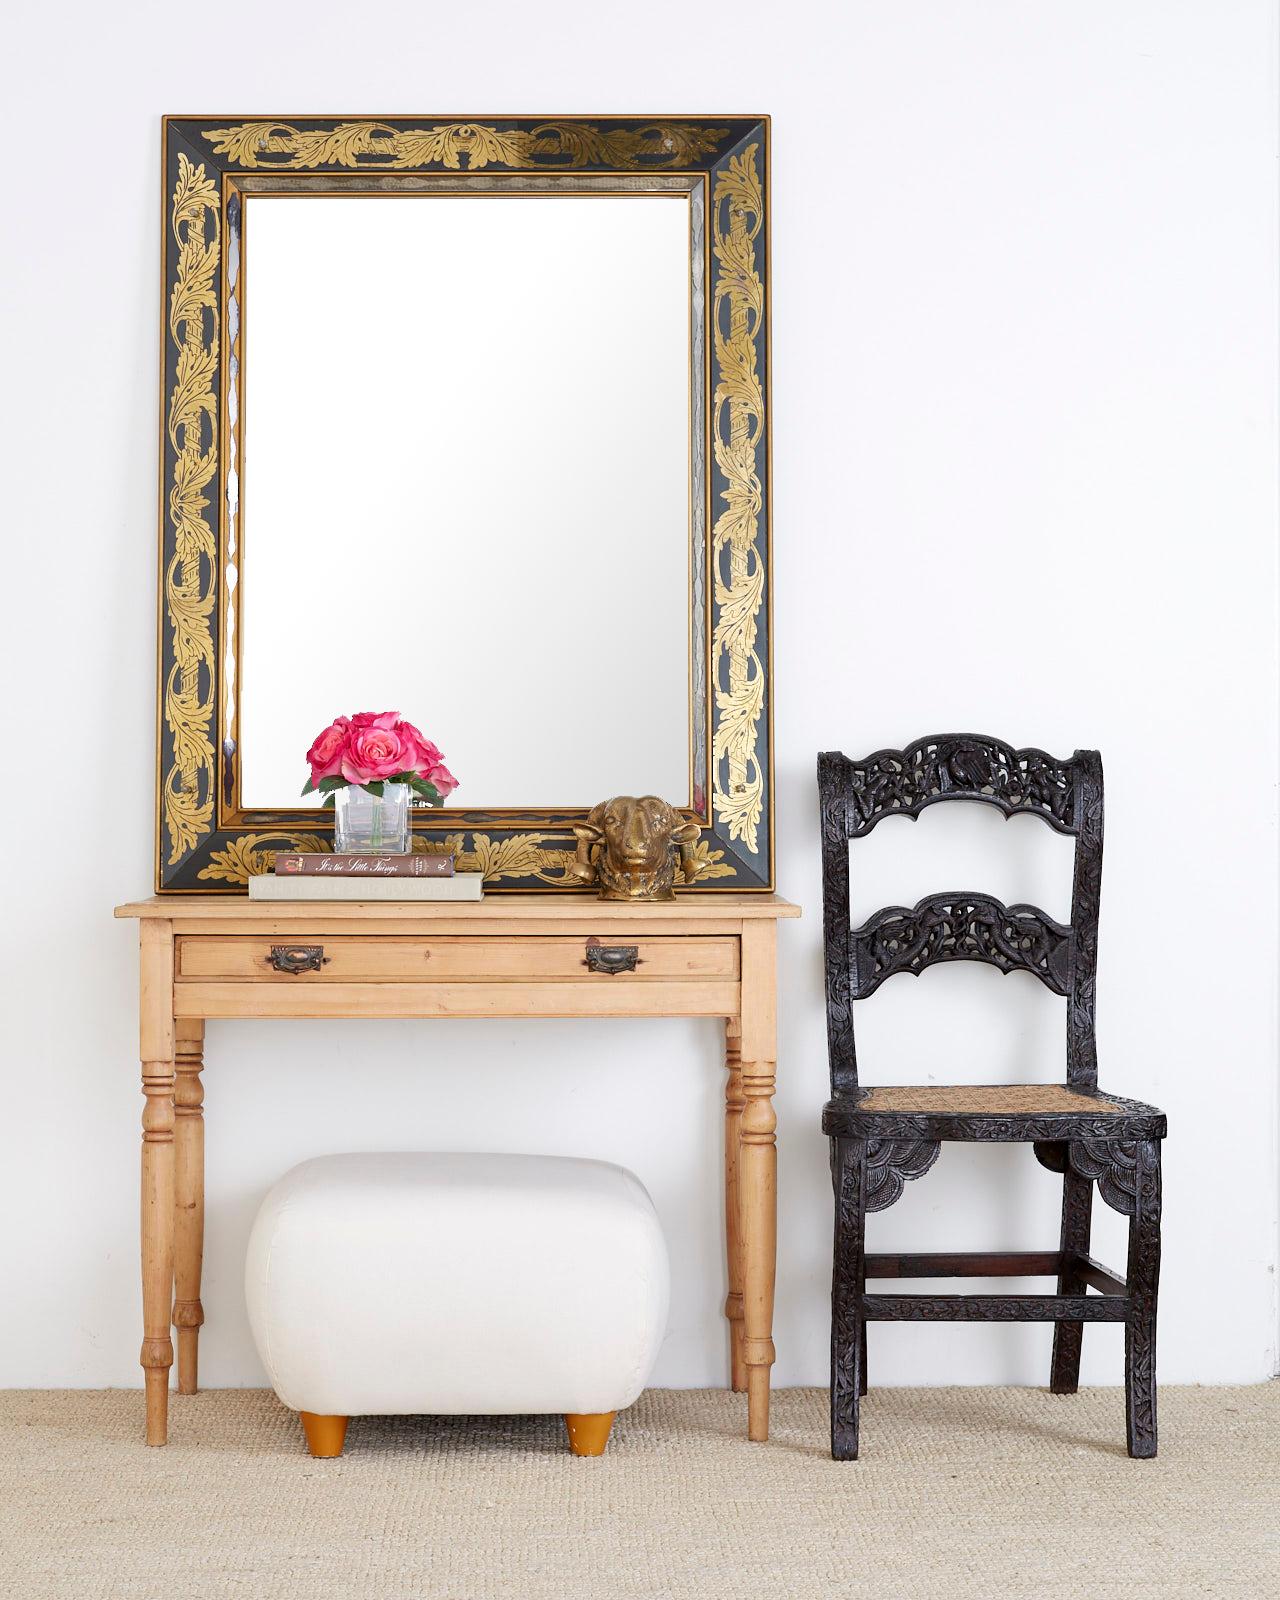 20th century Italian mirror with a thick reverse gold-leaf painted eglomise style glass border. Features a neoclassical scrolling acanthus gilt design on all four sides with a dramatic black ground. Fastened with small decorative pins having glass